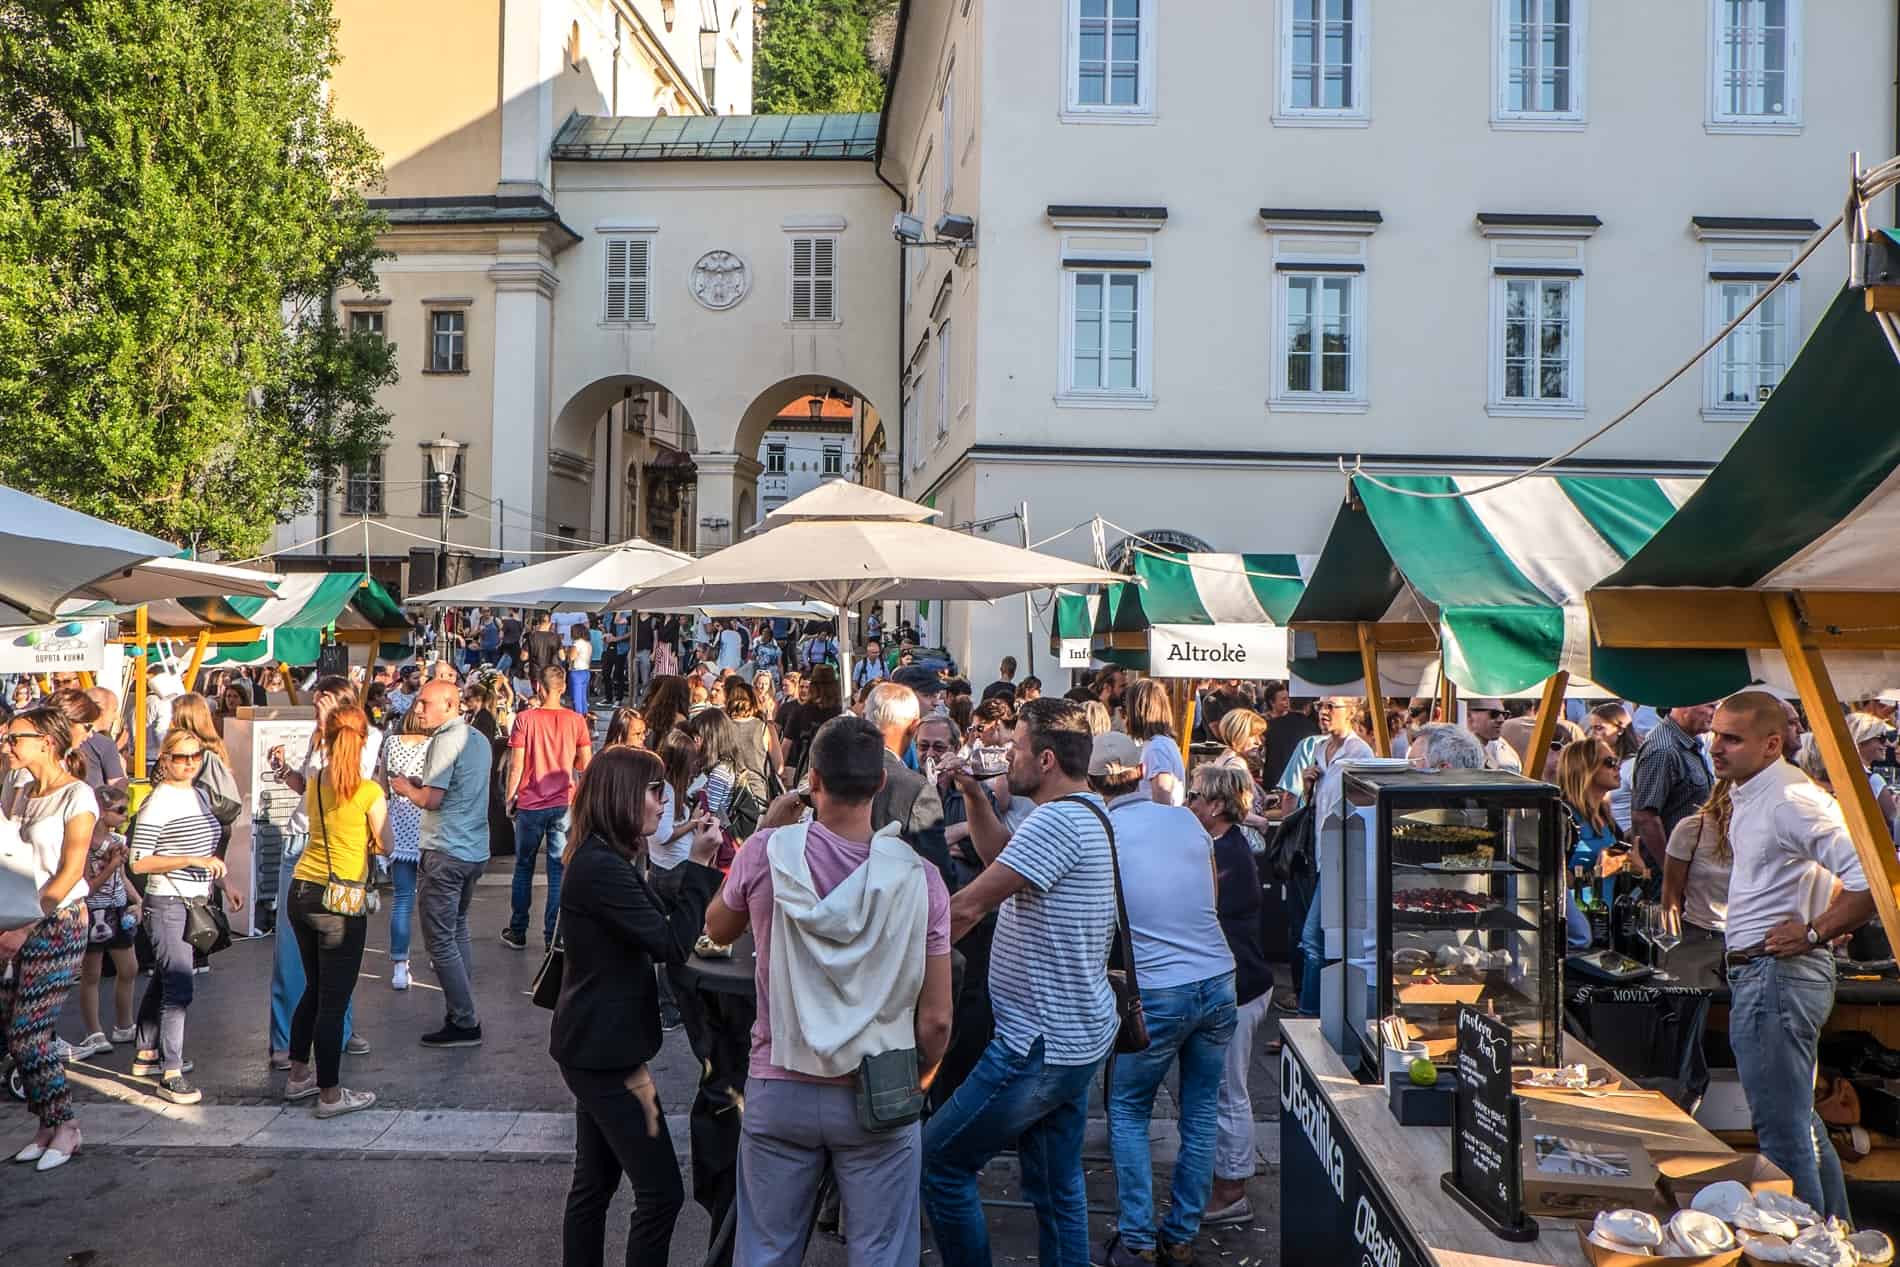 Crowds gather around stalls and tables at the Open Kitchen Market in Ljubljana every Friday.